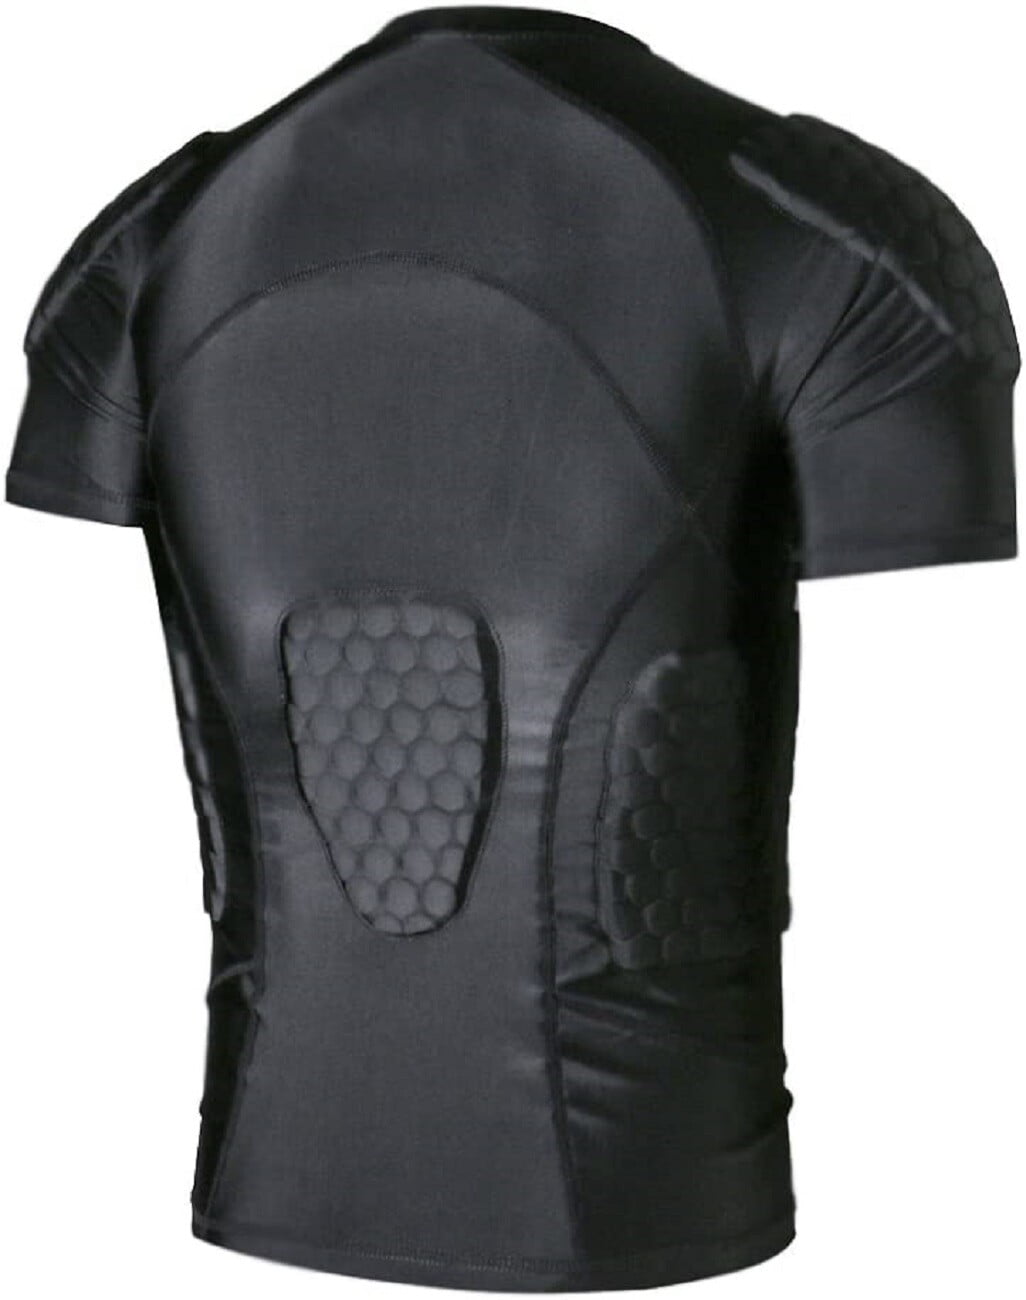 TUOY Men's Padded Compression Shirt Protective Shirt Rib Chest